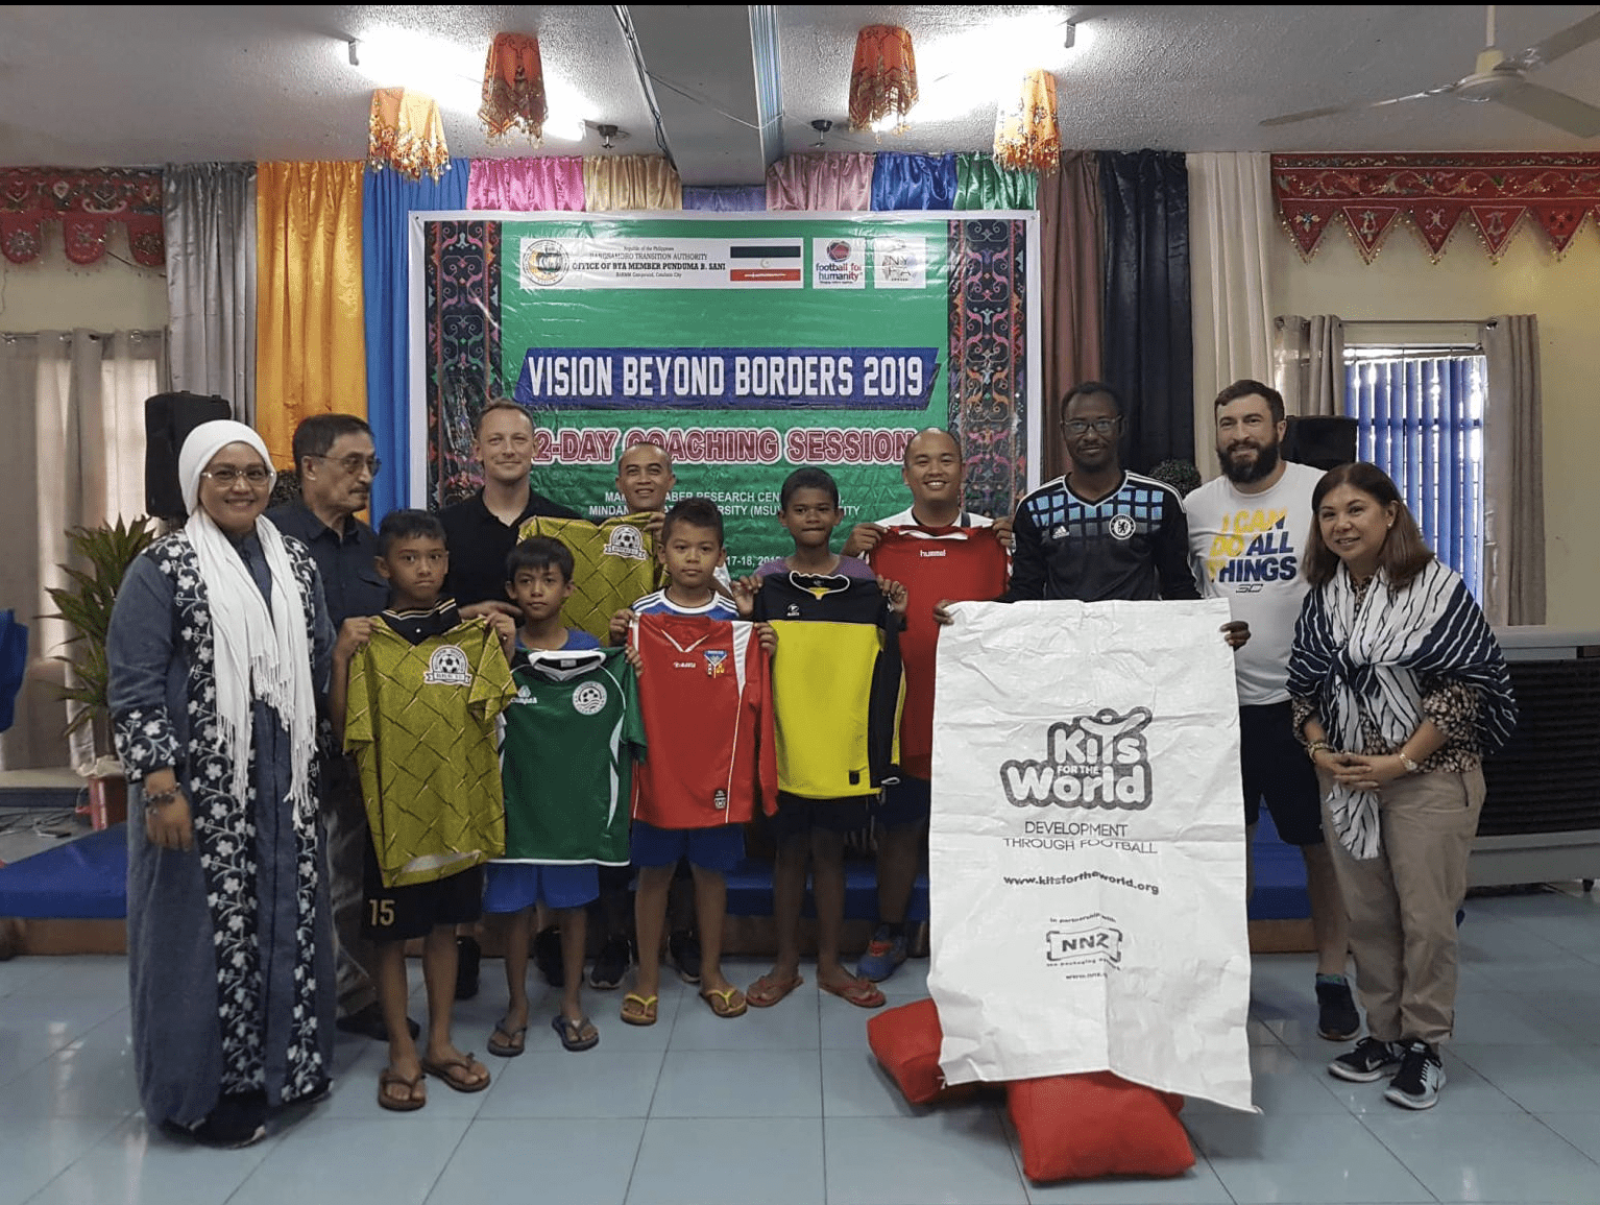 Football For Humanity and kits for the world football kit donation